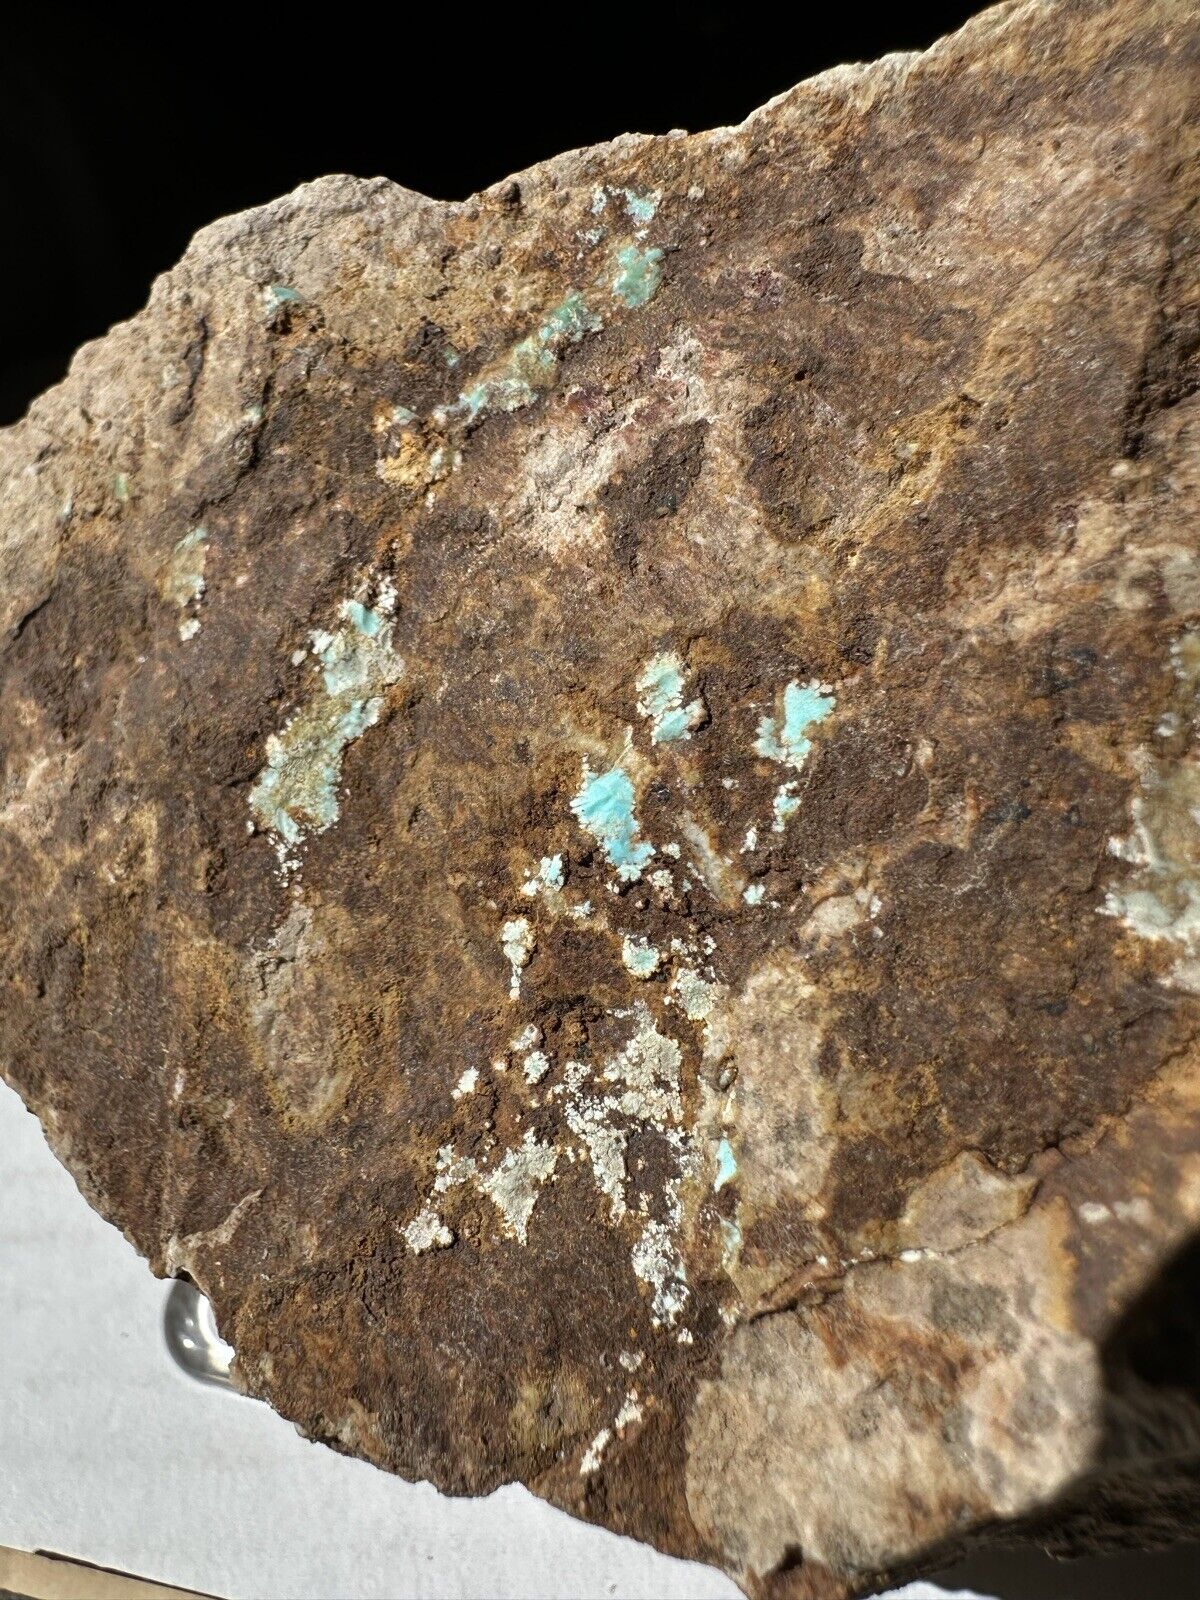 Turquoise, from Cerillos District, Santa Fe County, New Mexico